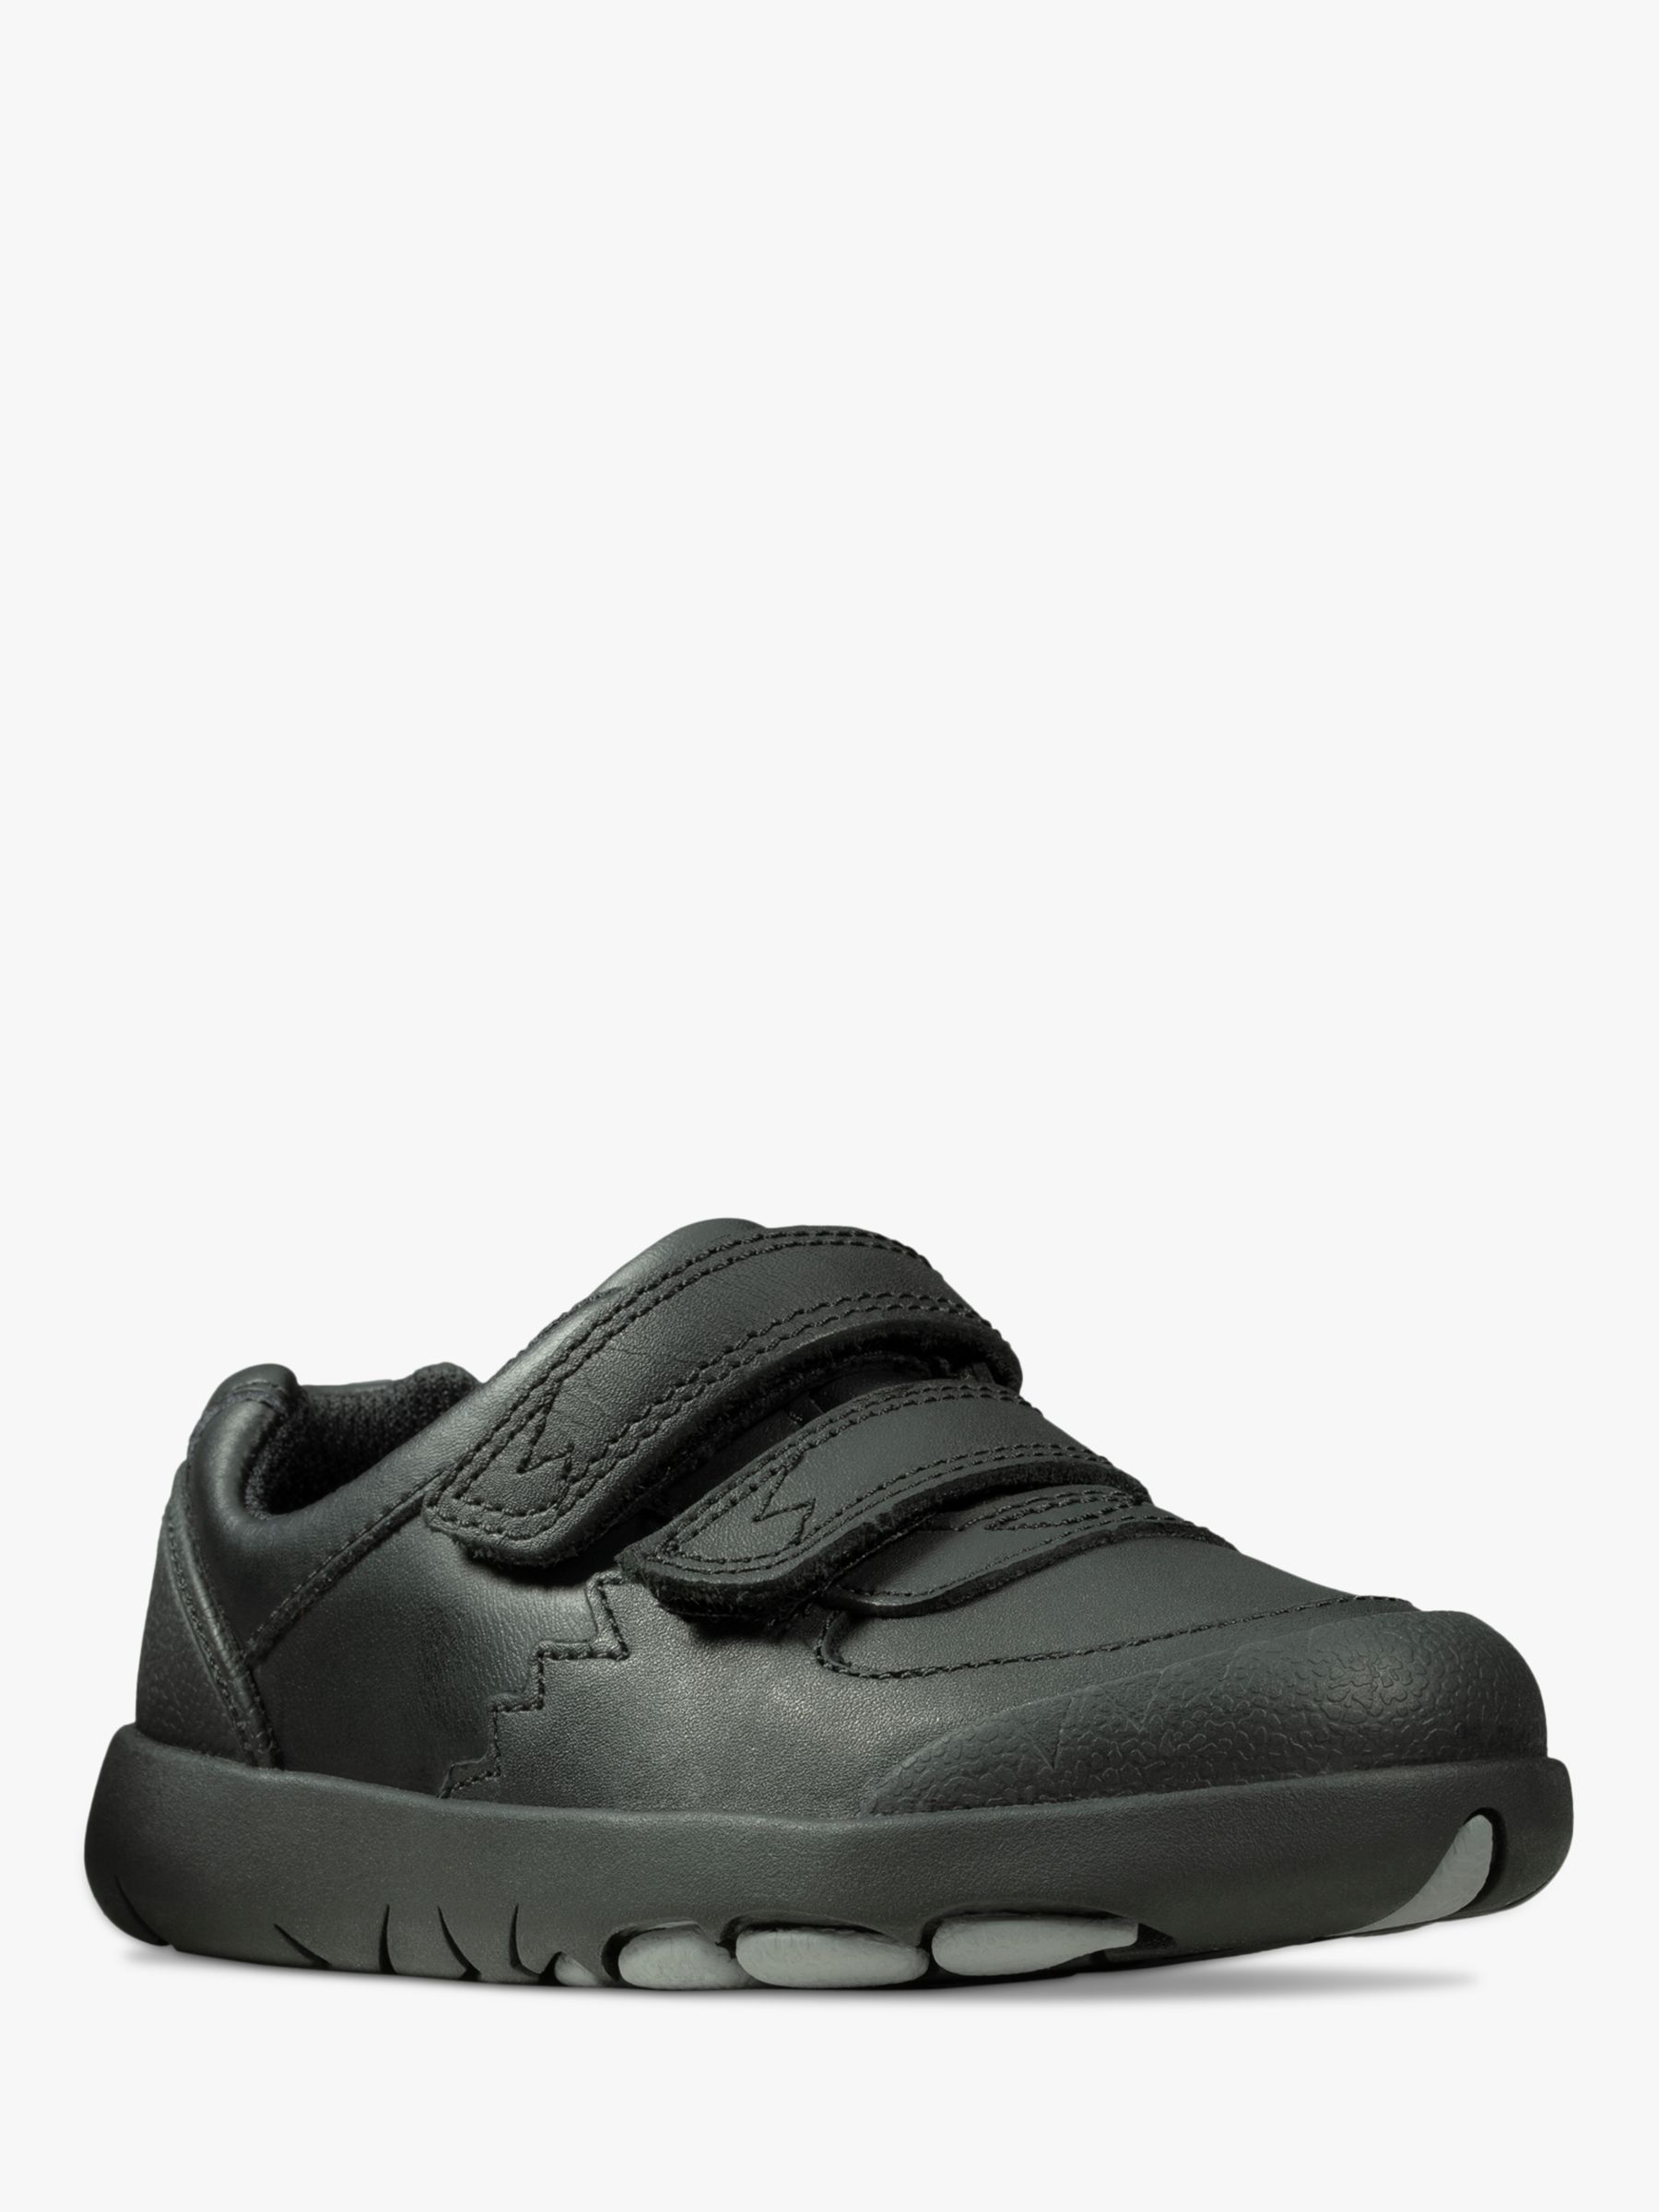 Match Intermediate Anerkendelse Clarks Children's Rex Pace Leather Toddler Shoes, Black at John Lewis &  Partners